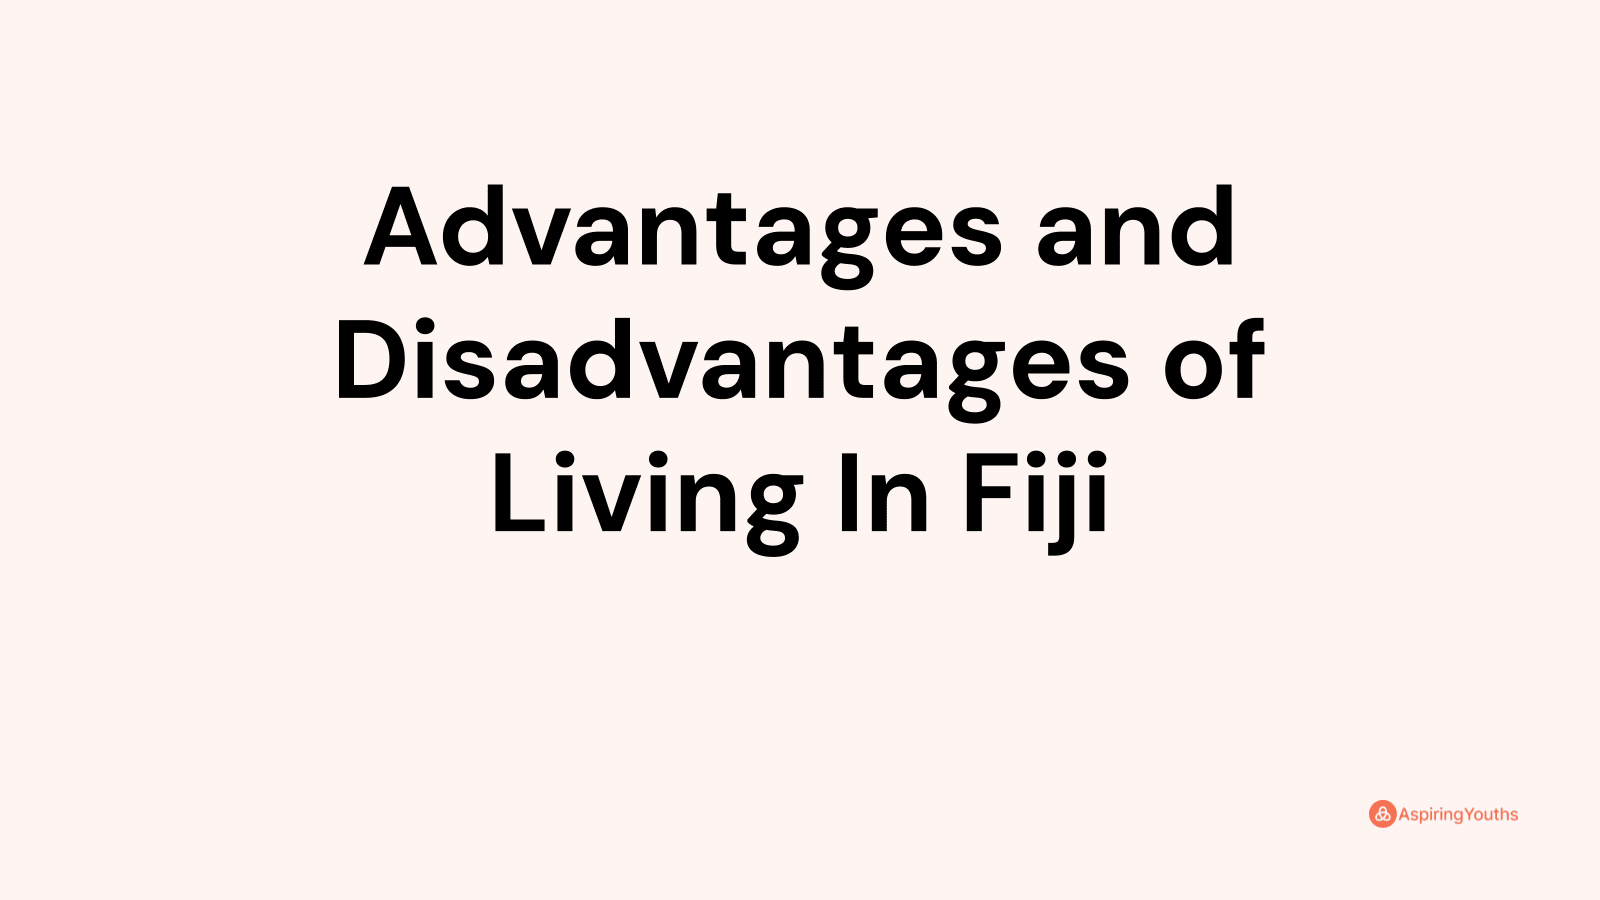 Advantages and disadvantages of Living In Fiji